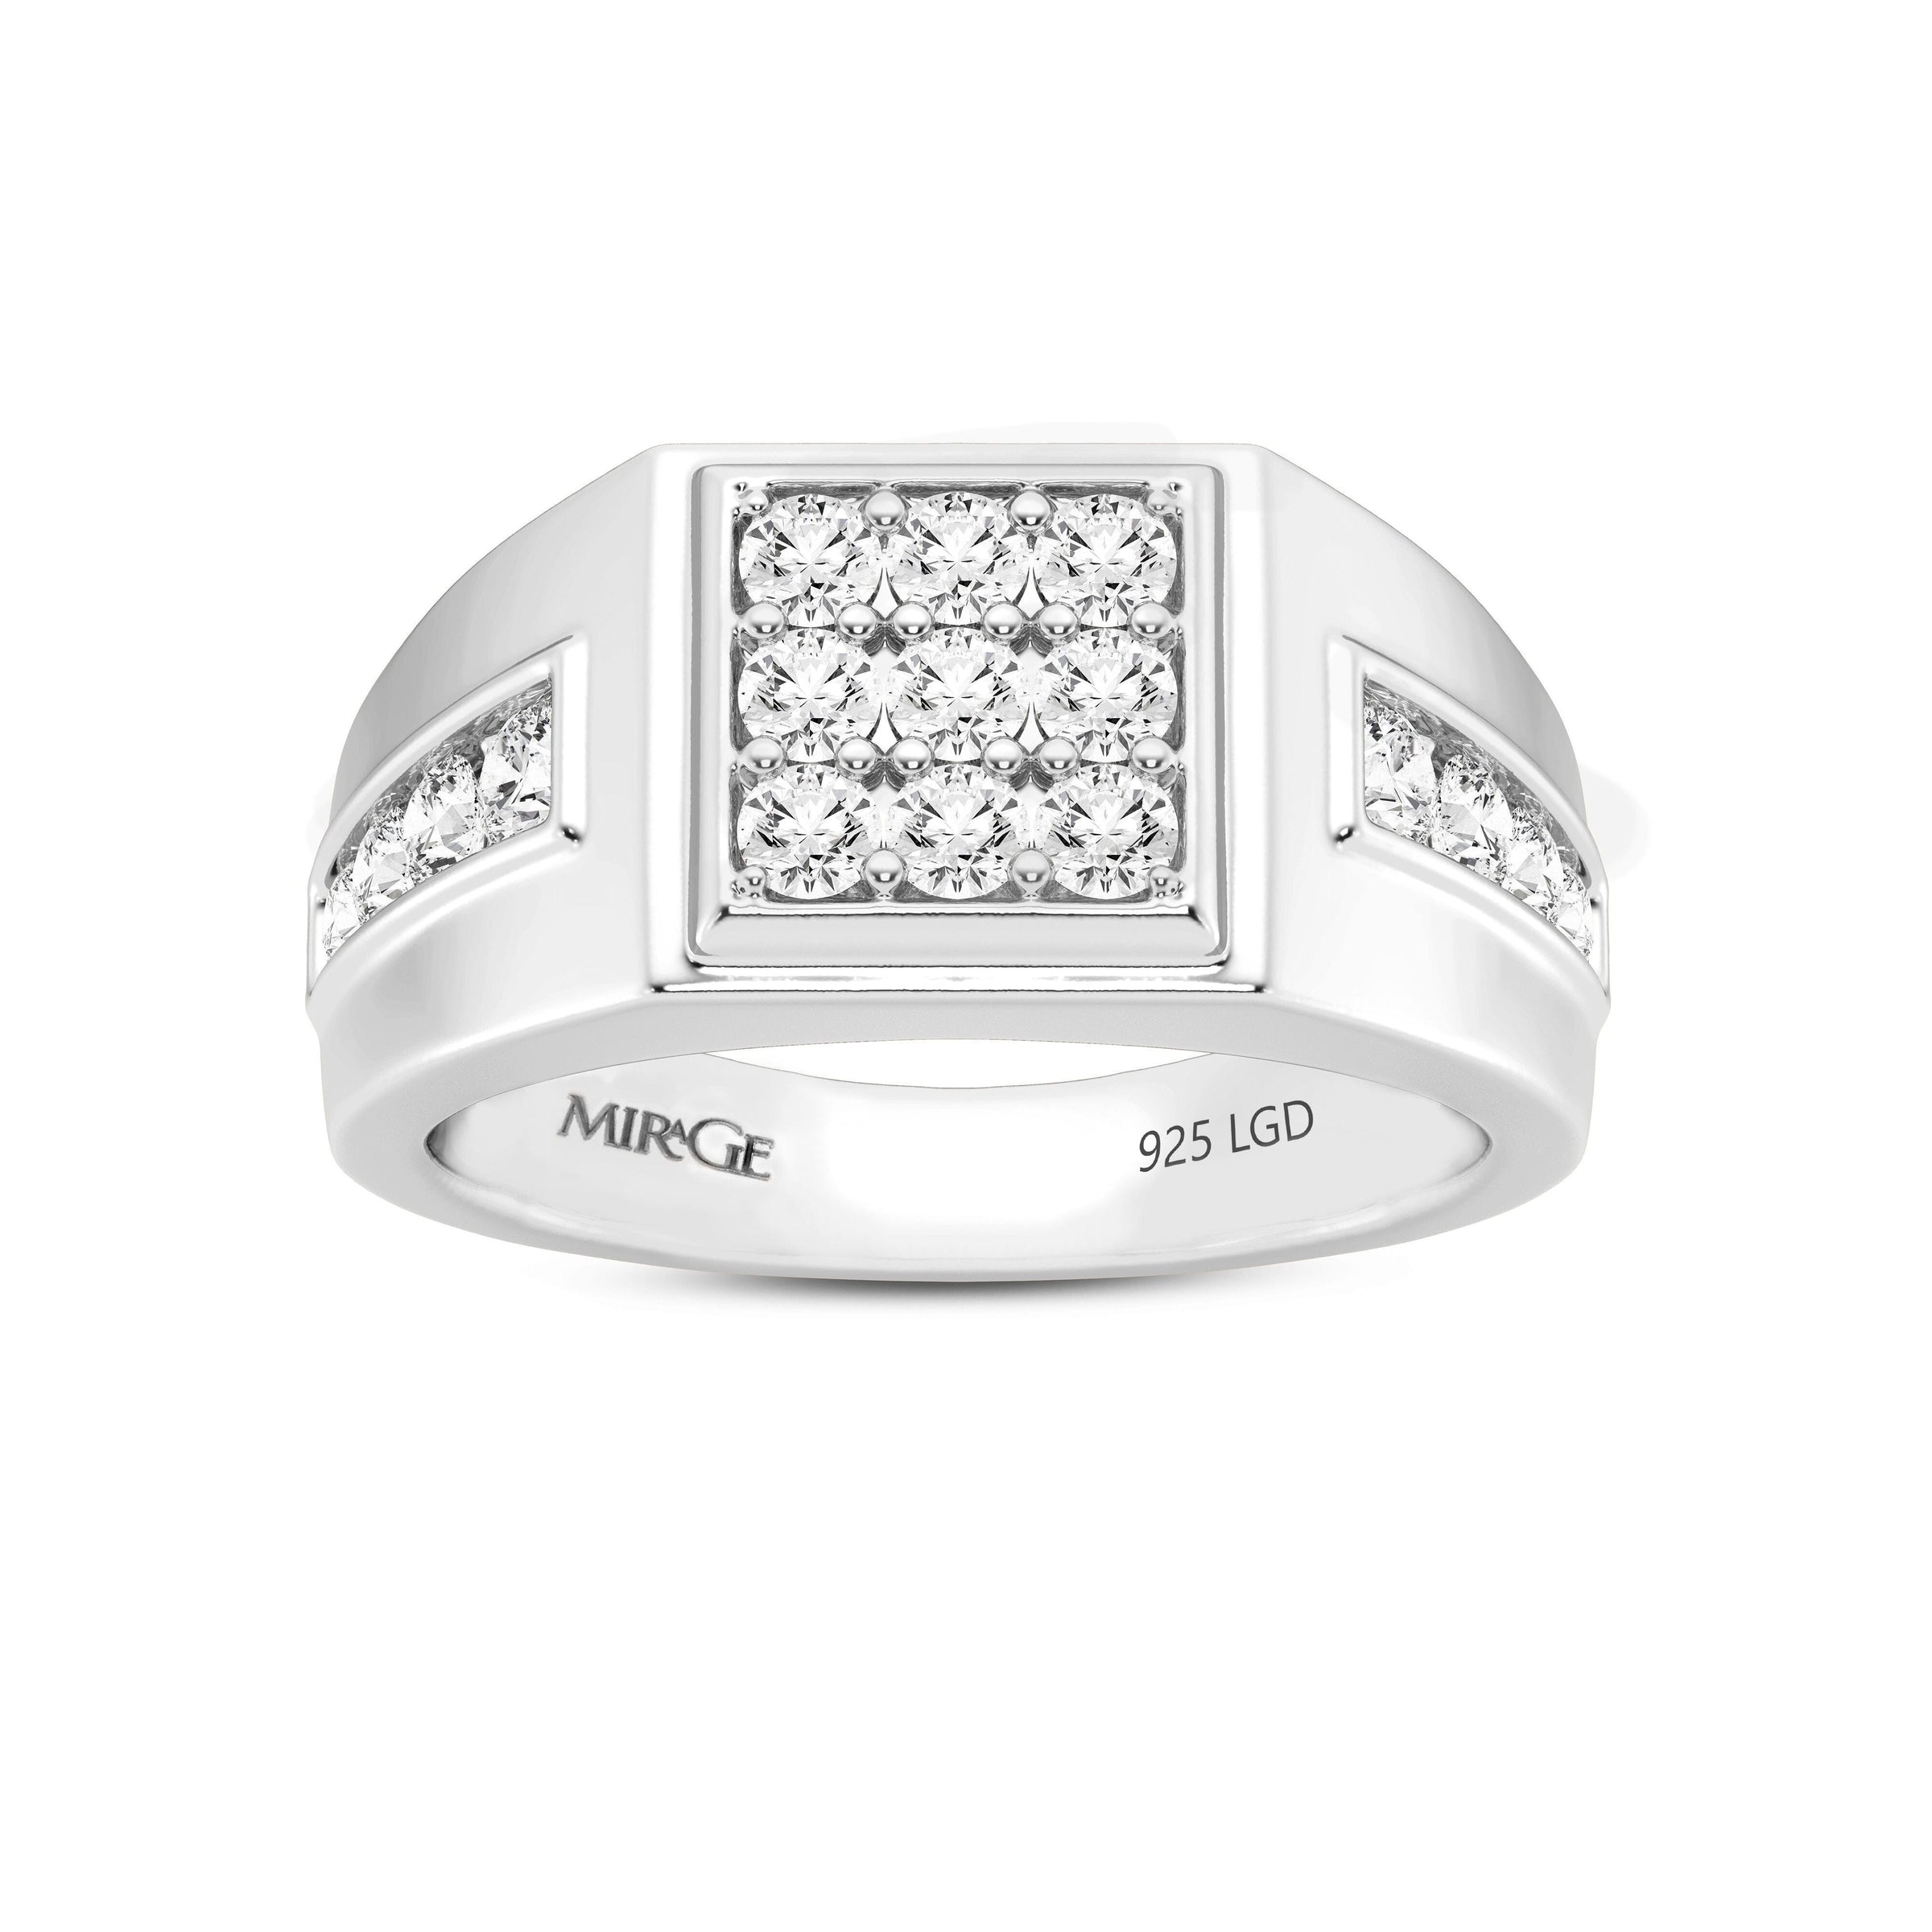 Men's Brilliant Tablet Ring with 1.60ct of Laboratory Grown Diamonds in Mirage Sterling Silver and Platinum Rings Bevilles 